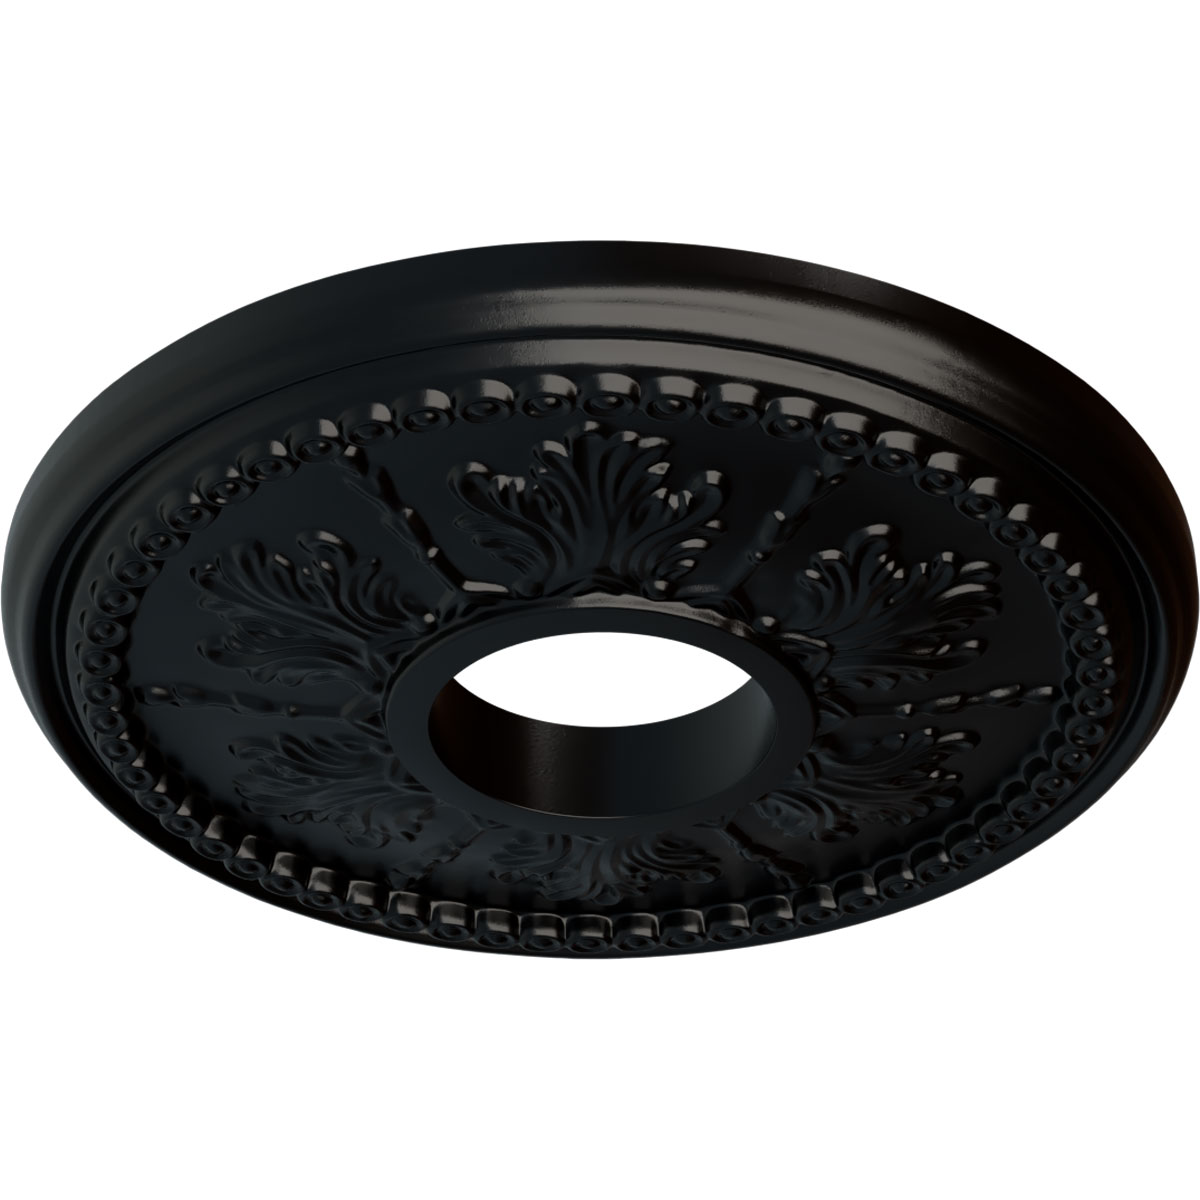 Ekena Millwork 13 7/8"OD x 3 3/4"ID x 1 1/4"P Tirana Ceiling Medallion (Fits Canopies up to 4 3/4"), Hand-Painted Jet Black - image 2 of 4